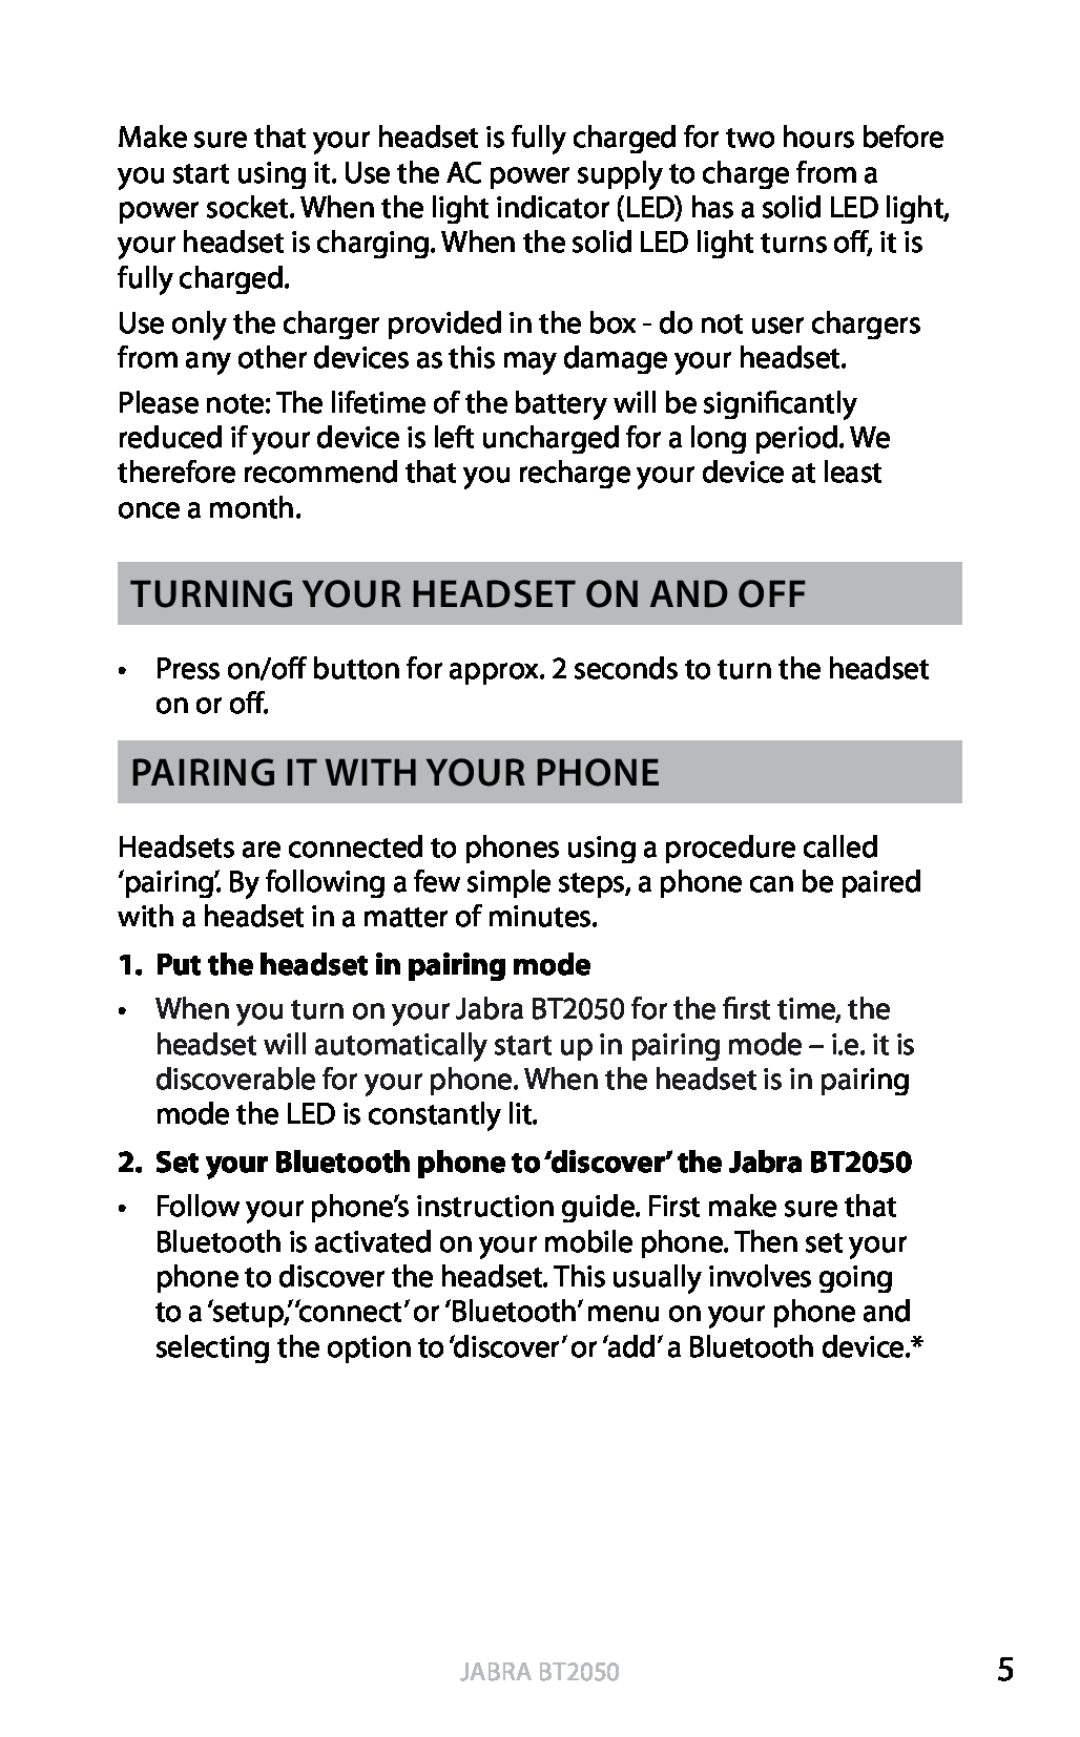 Jabra BT2050 Turning your headset on and off, Pairing it with your phone, Put the headset in pairing mode, english 